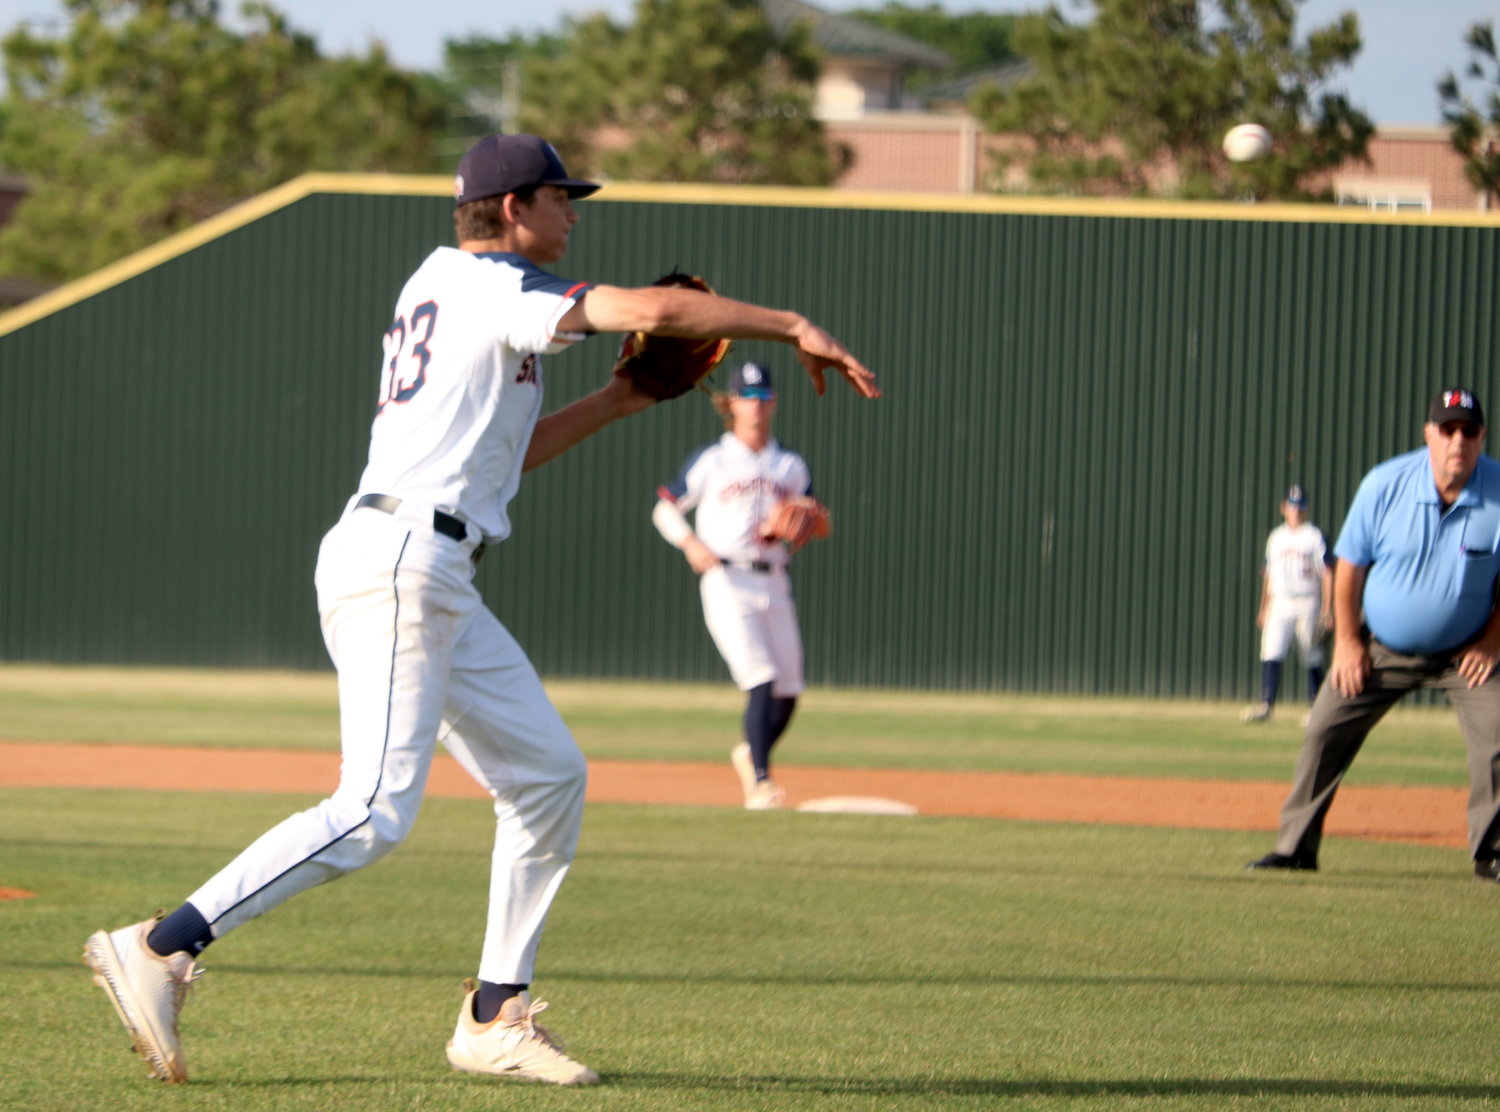 Nathan Johnson makes a throw to first base during Friday’s District 19-6A  game between Seven Lakes and Cinco Ranch at the Seven Lakes baseball field.